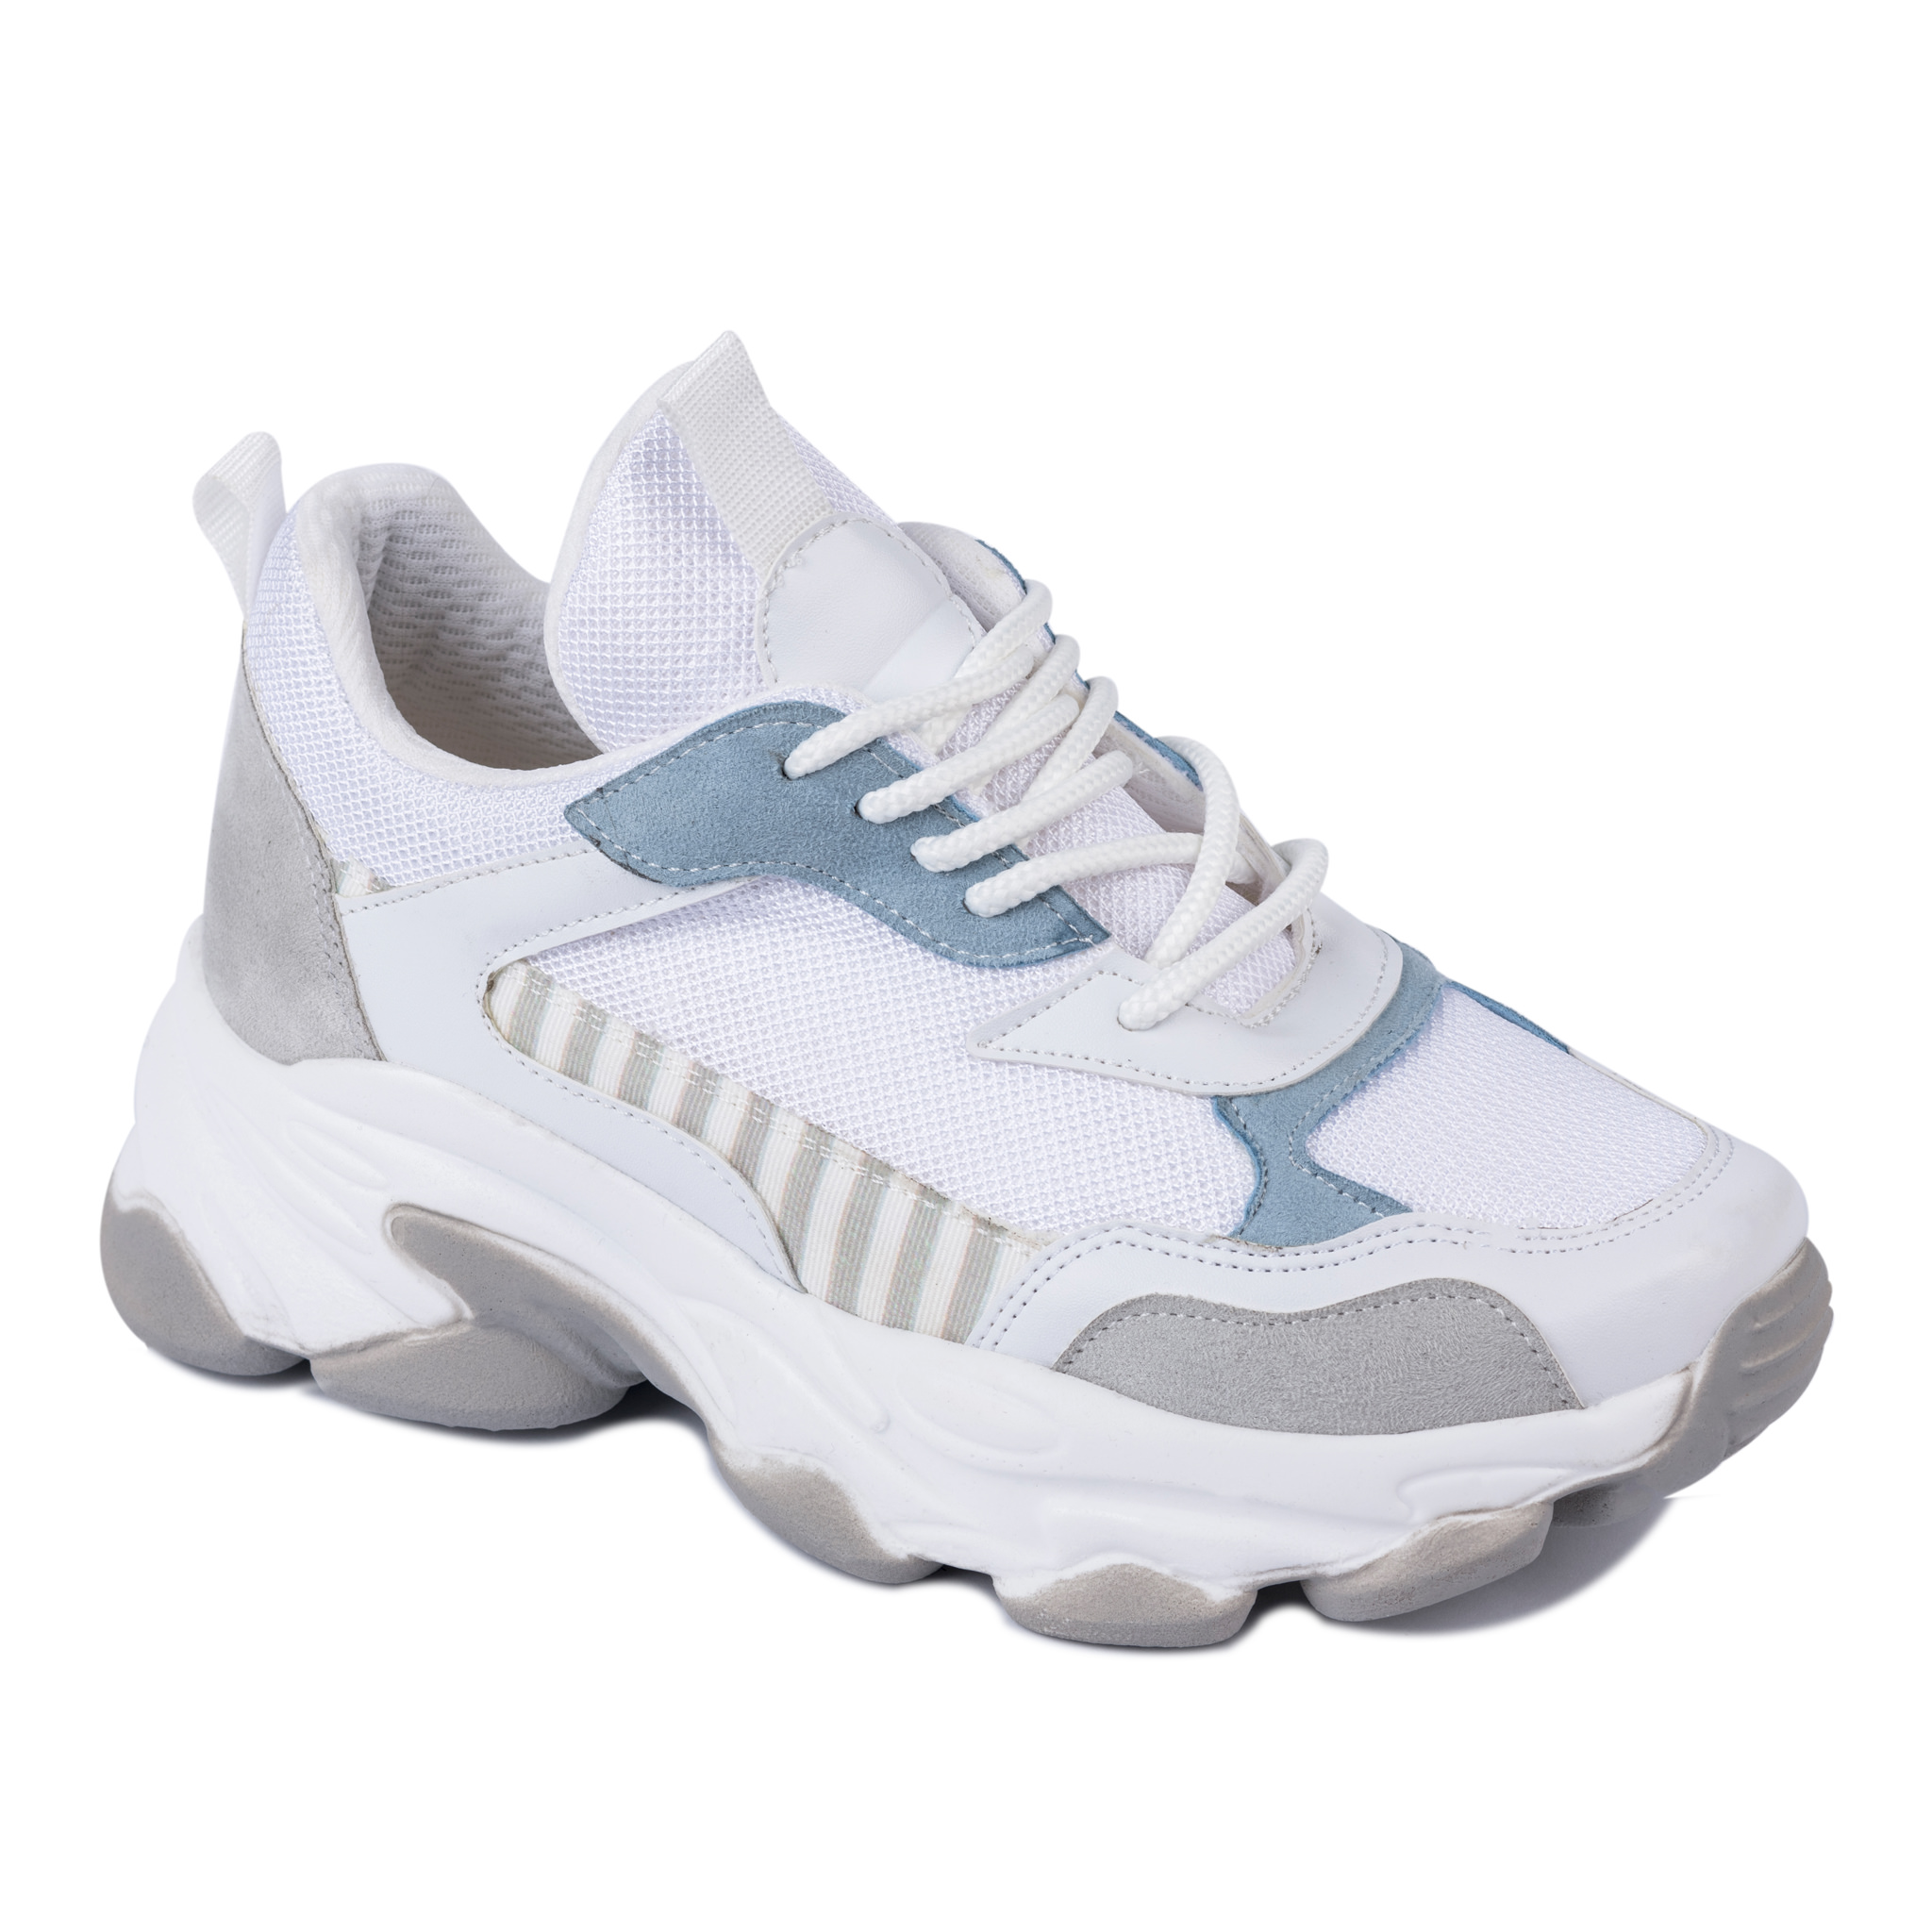 SPORTS SOLE SNEAKERS - WHITE